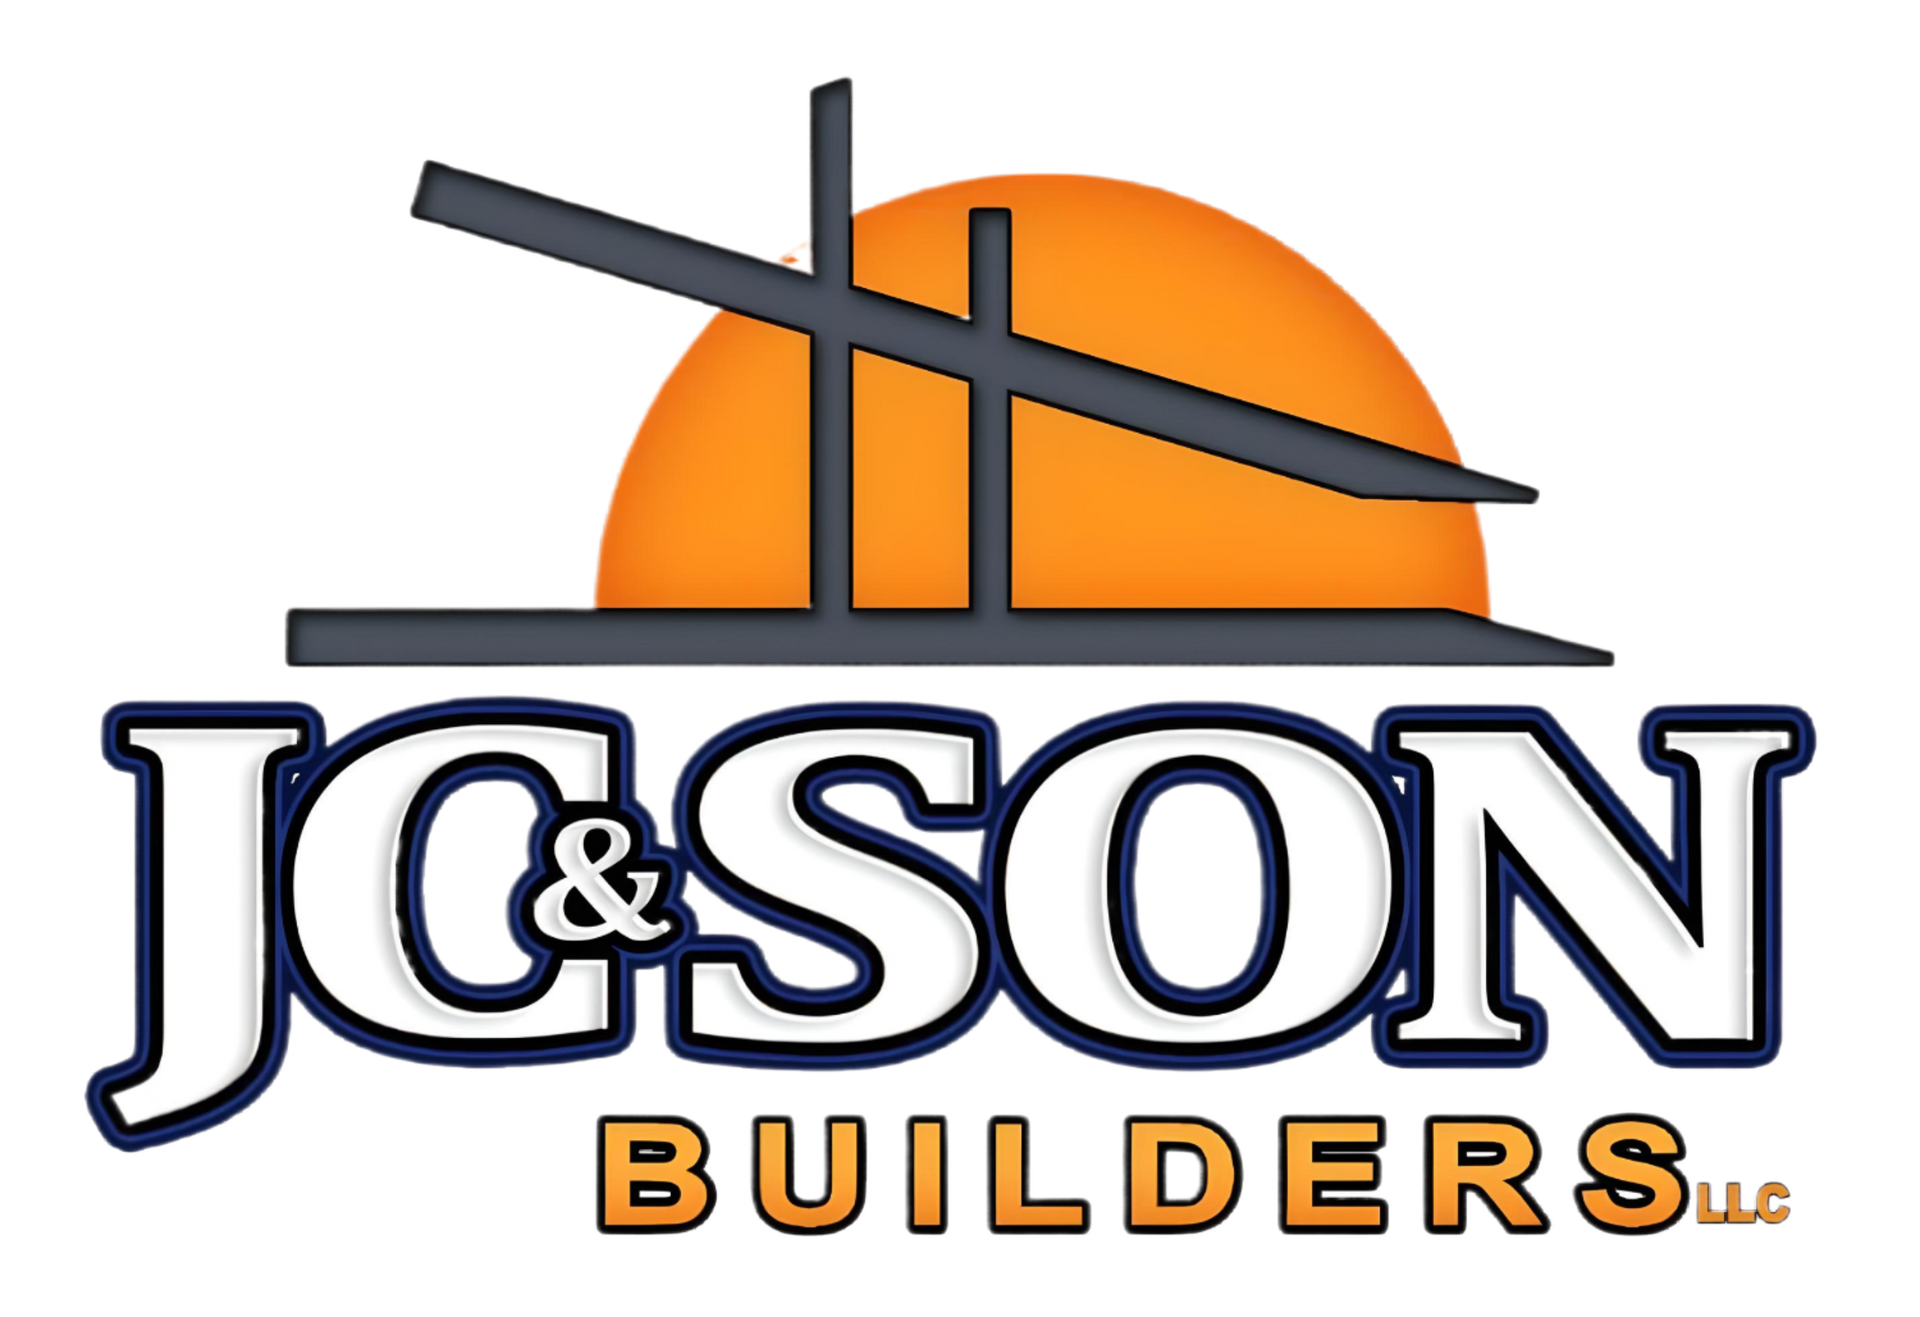 a logo for jc & son builders llc with an orange sun in the background